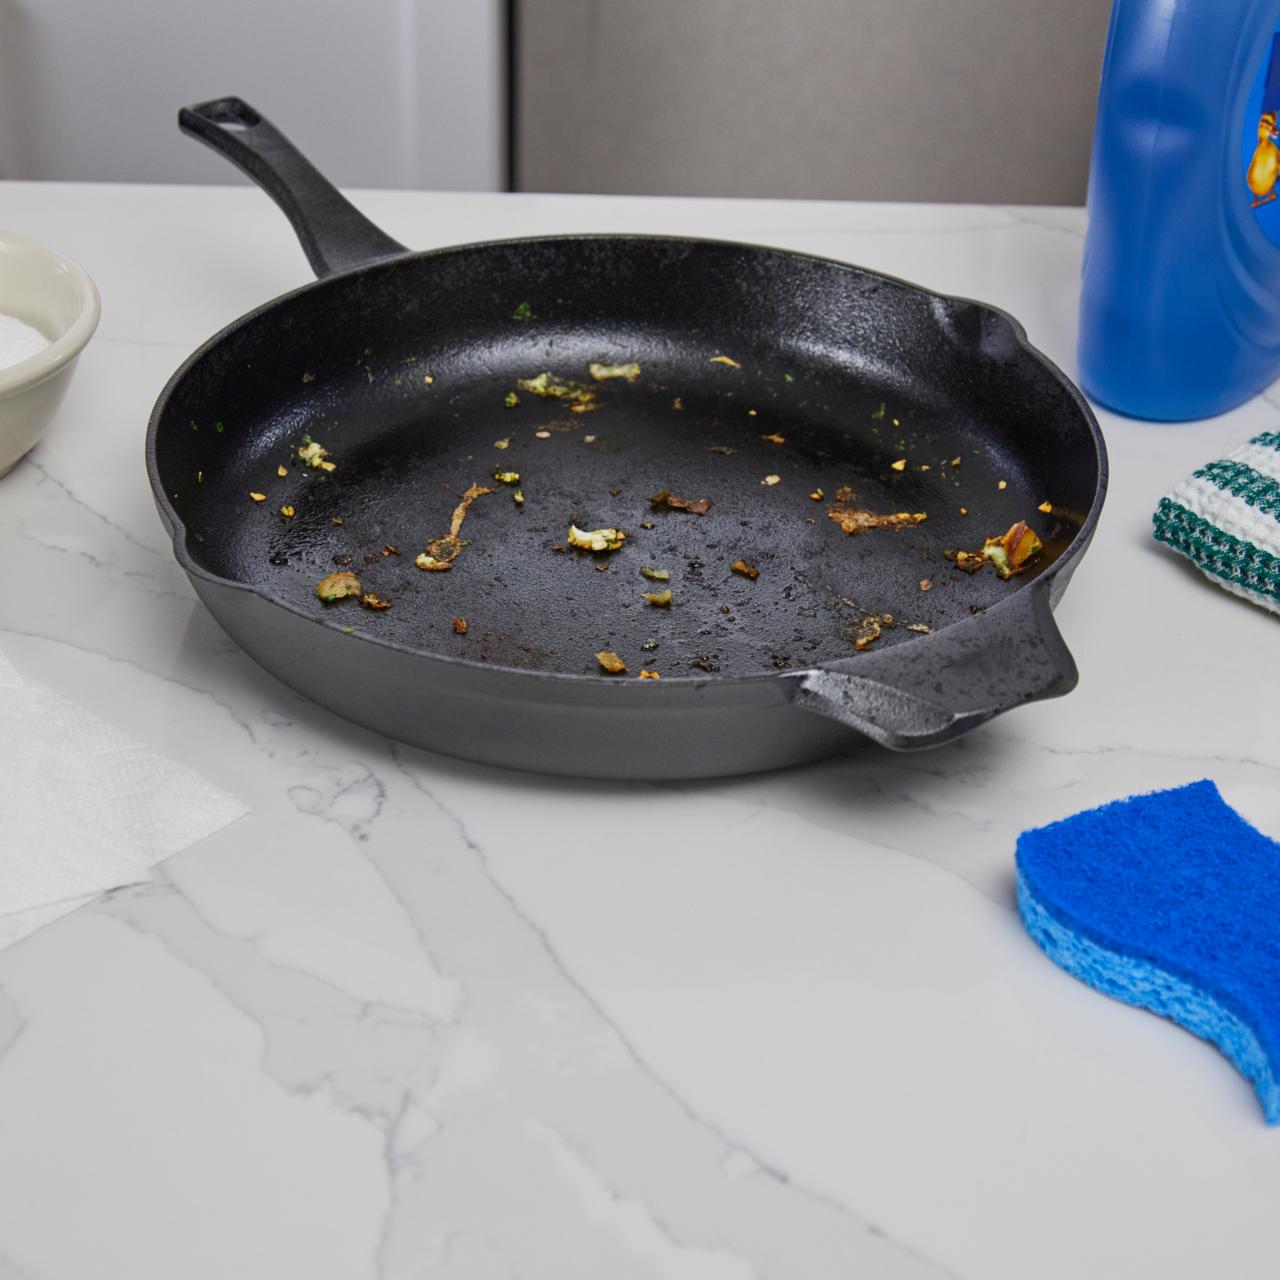 6 Things You Should Never Do to Your Cast Iron Skillet